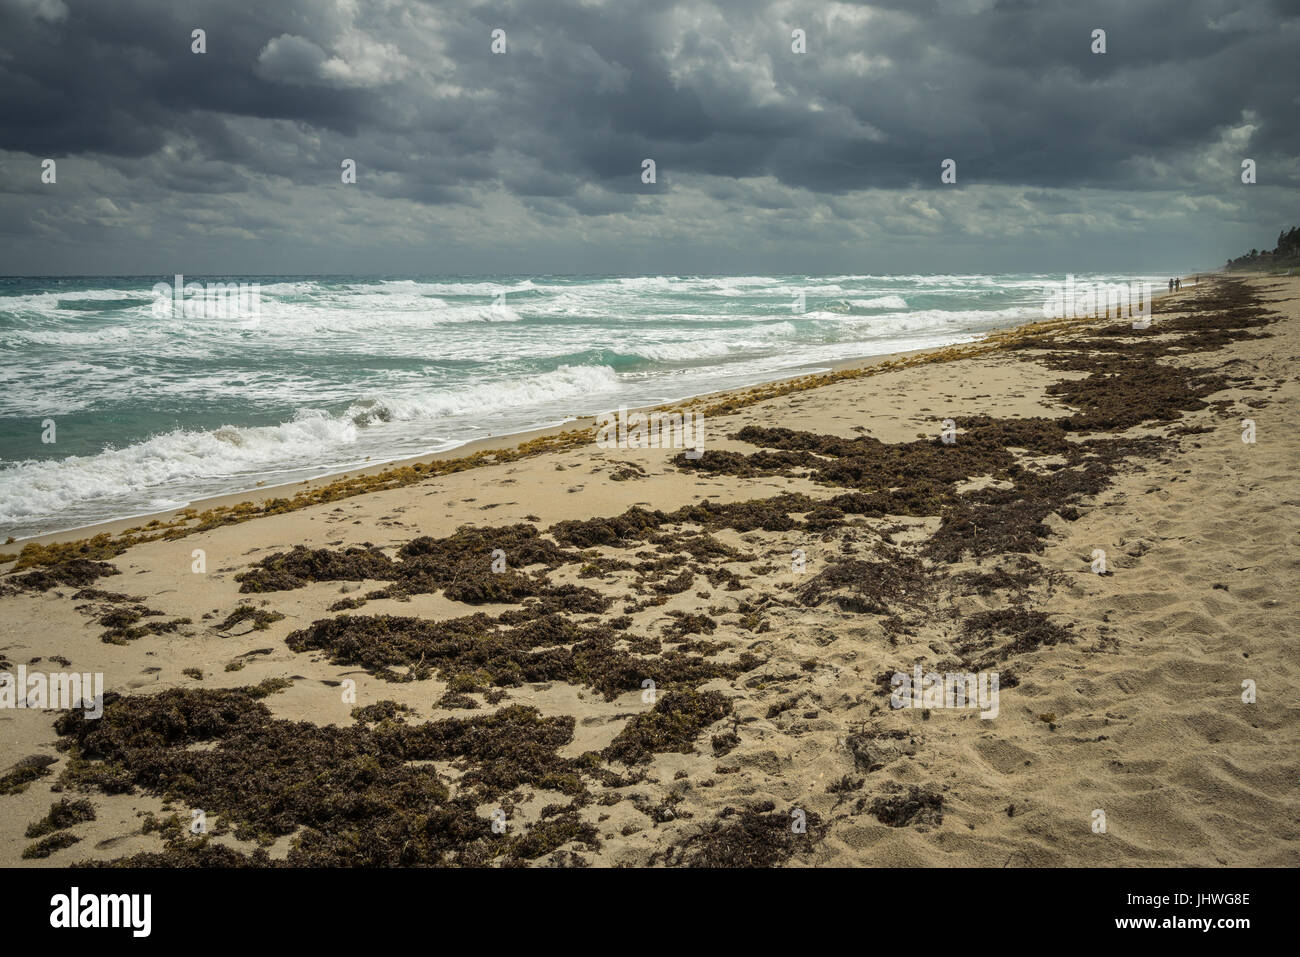 Stormy winter weather moves in over a beach in Palm Beach County, Florida, USA. Stock Photo